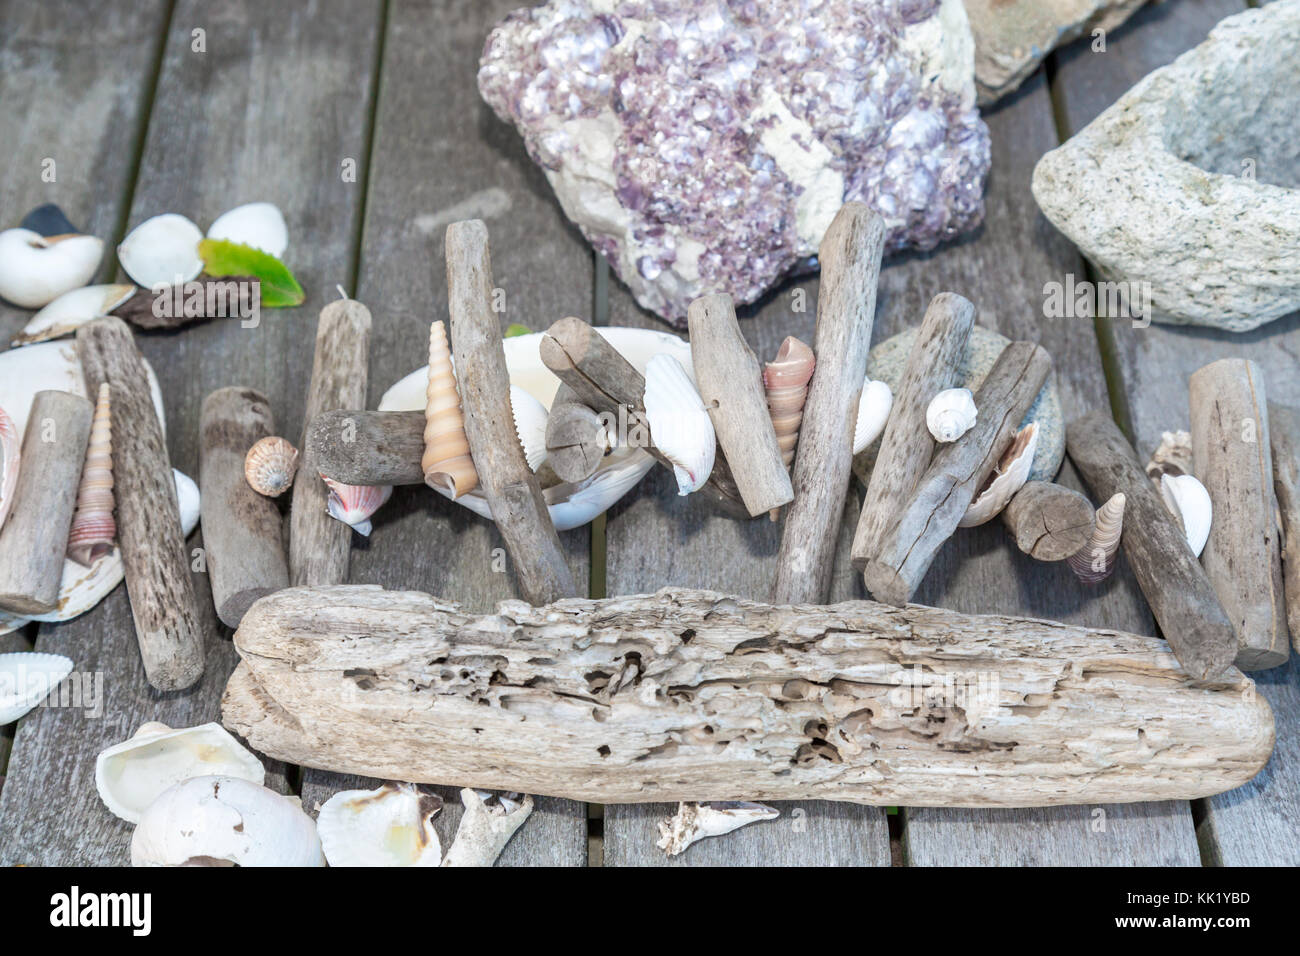 shells, wood and rocks in a simple arrangement on a table top Stock Photo